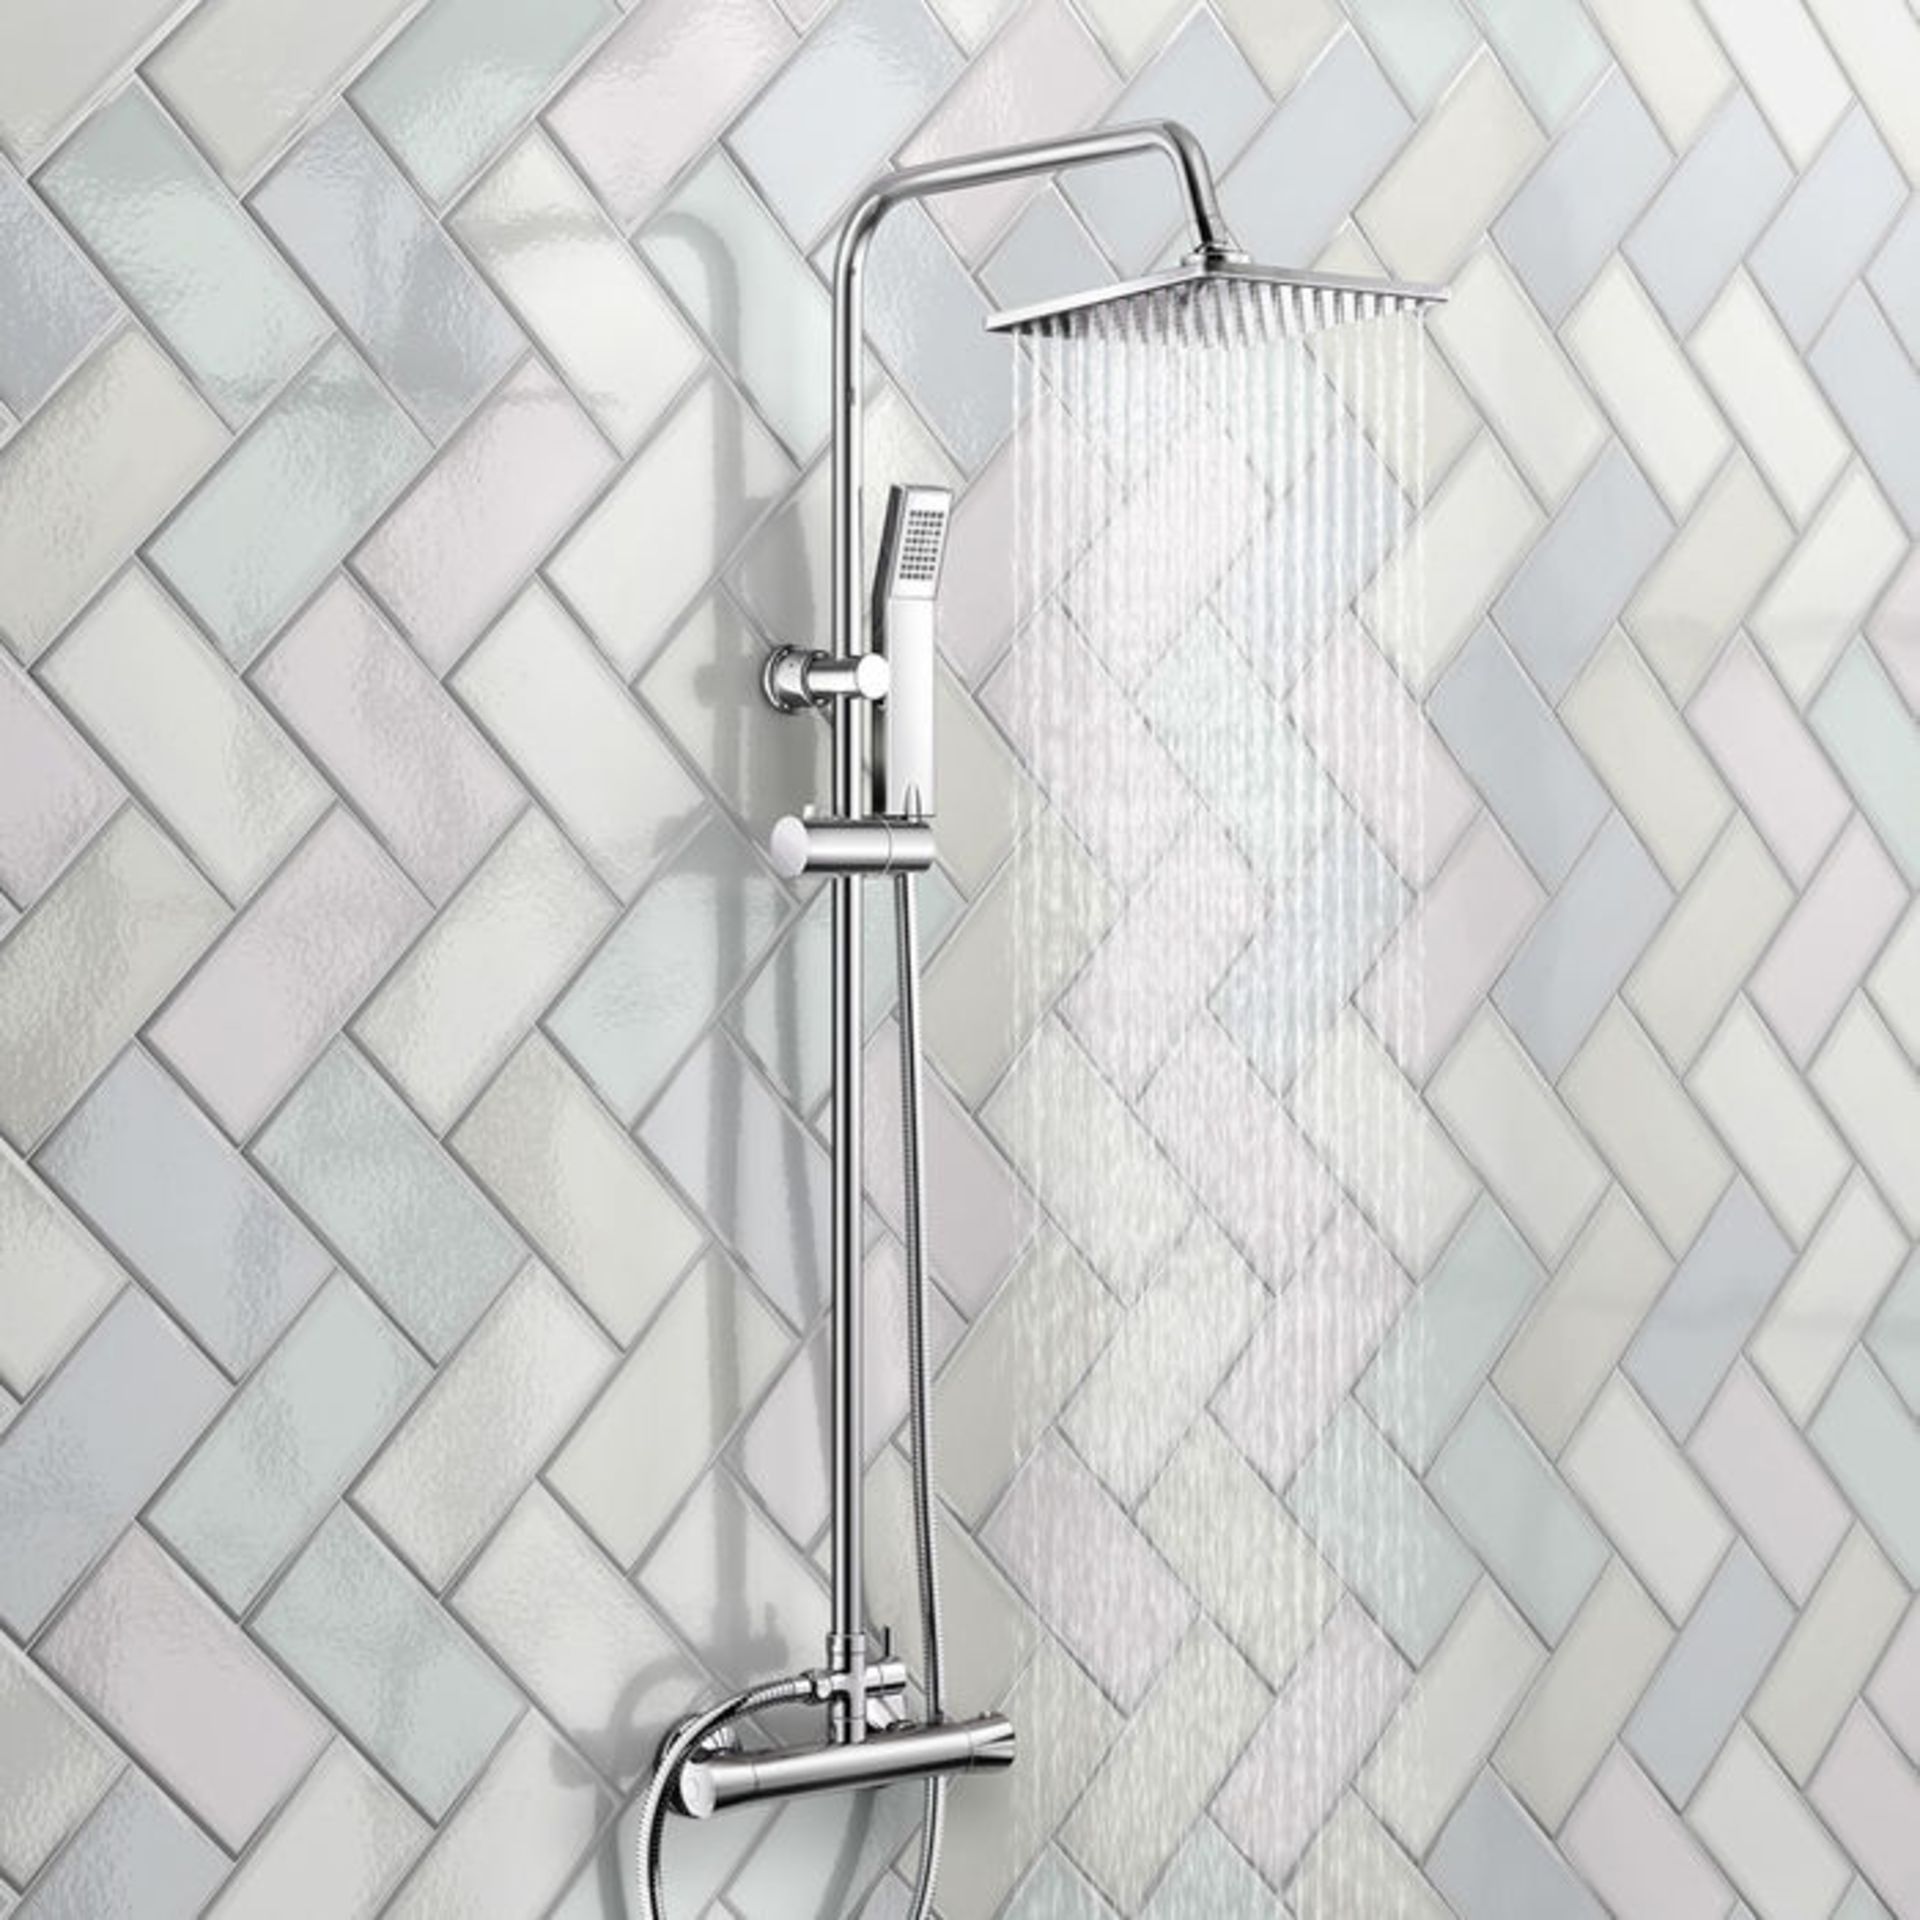 (ST119) Square Exposed Thermostatic Shower Kit Medium Head. Curved features and contemporary rounded